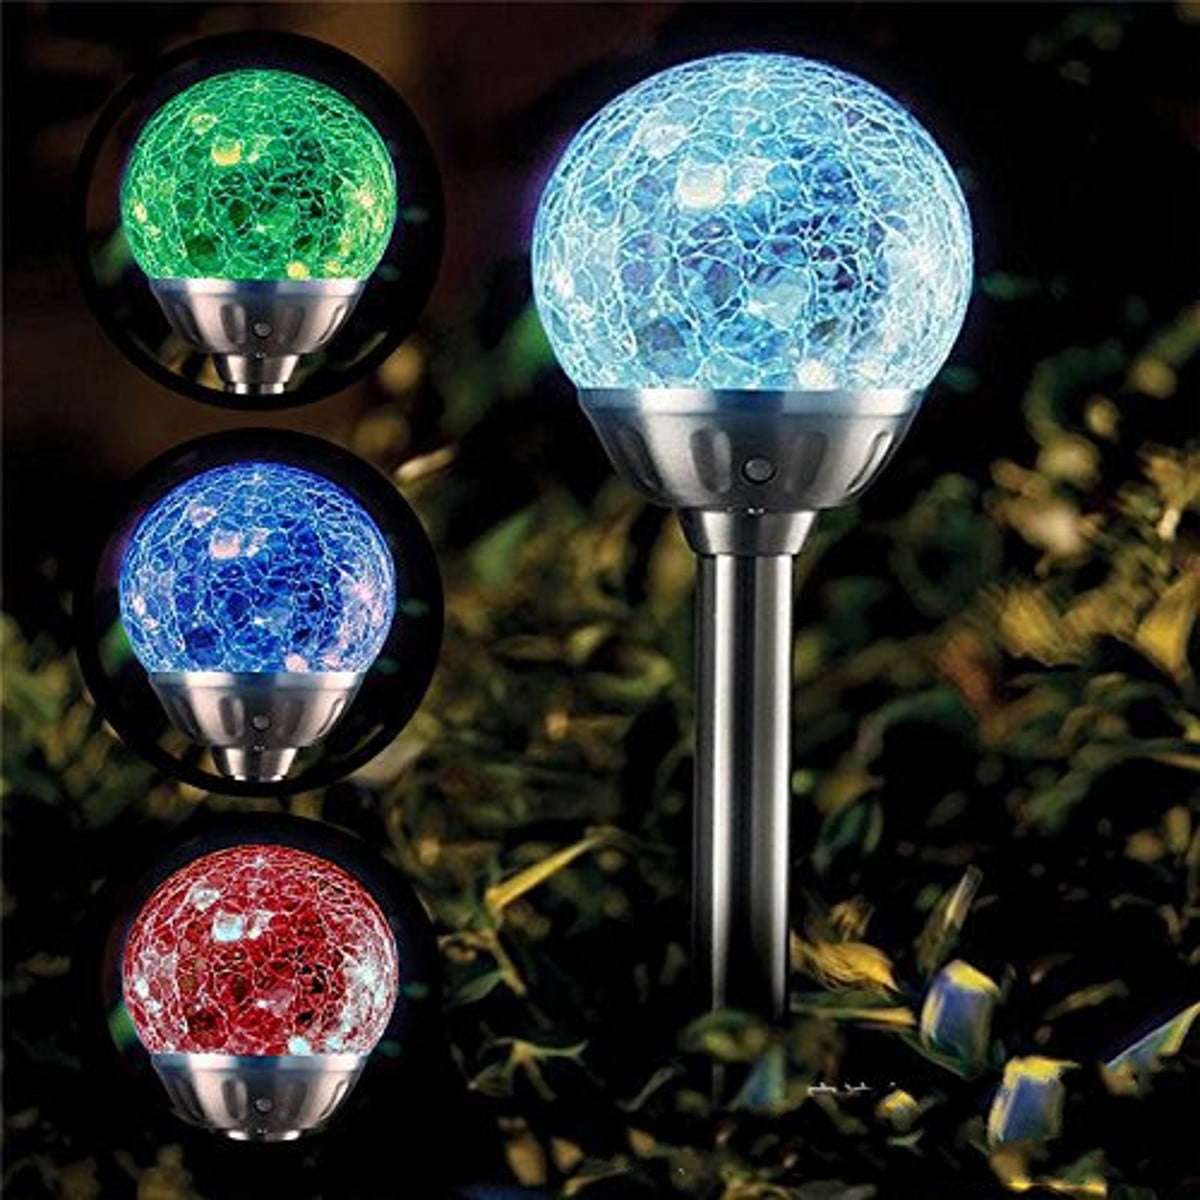 Silver & Stone 6 PK Solar LED Crackle Ball Effect Garden Lights Rechargeable Glass Look Garden Ground Stake Lights Borders and Flowerbeds Outdoor Pathway Globe Solar Lights for Lawns